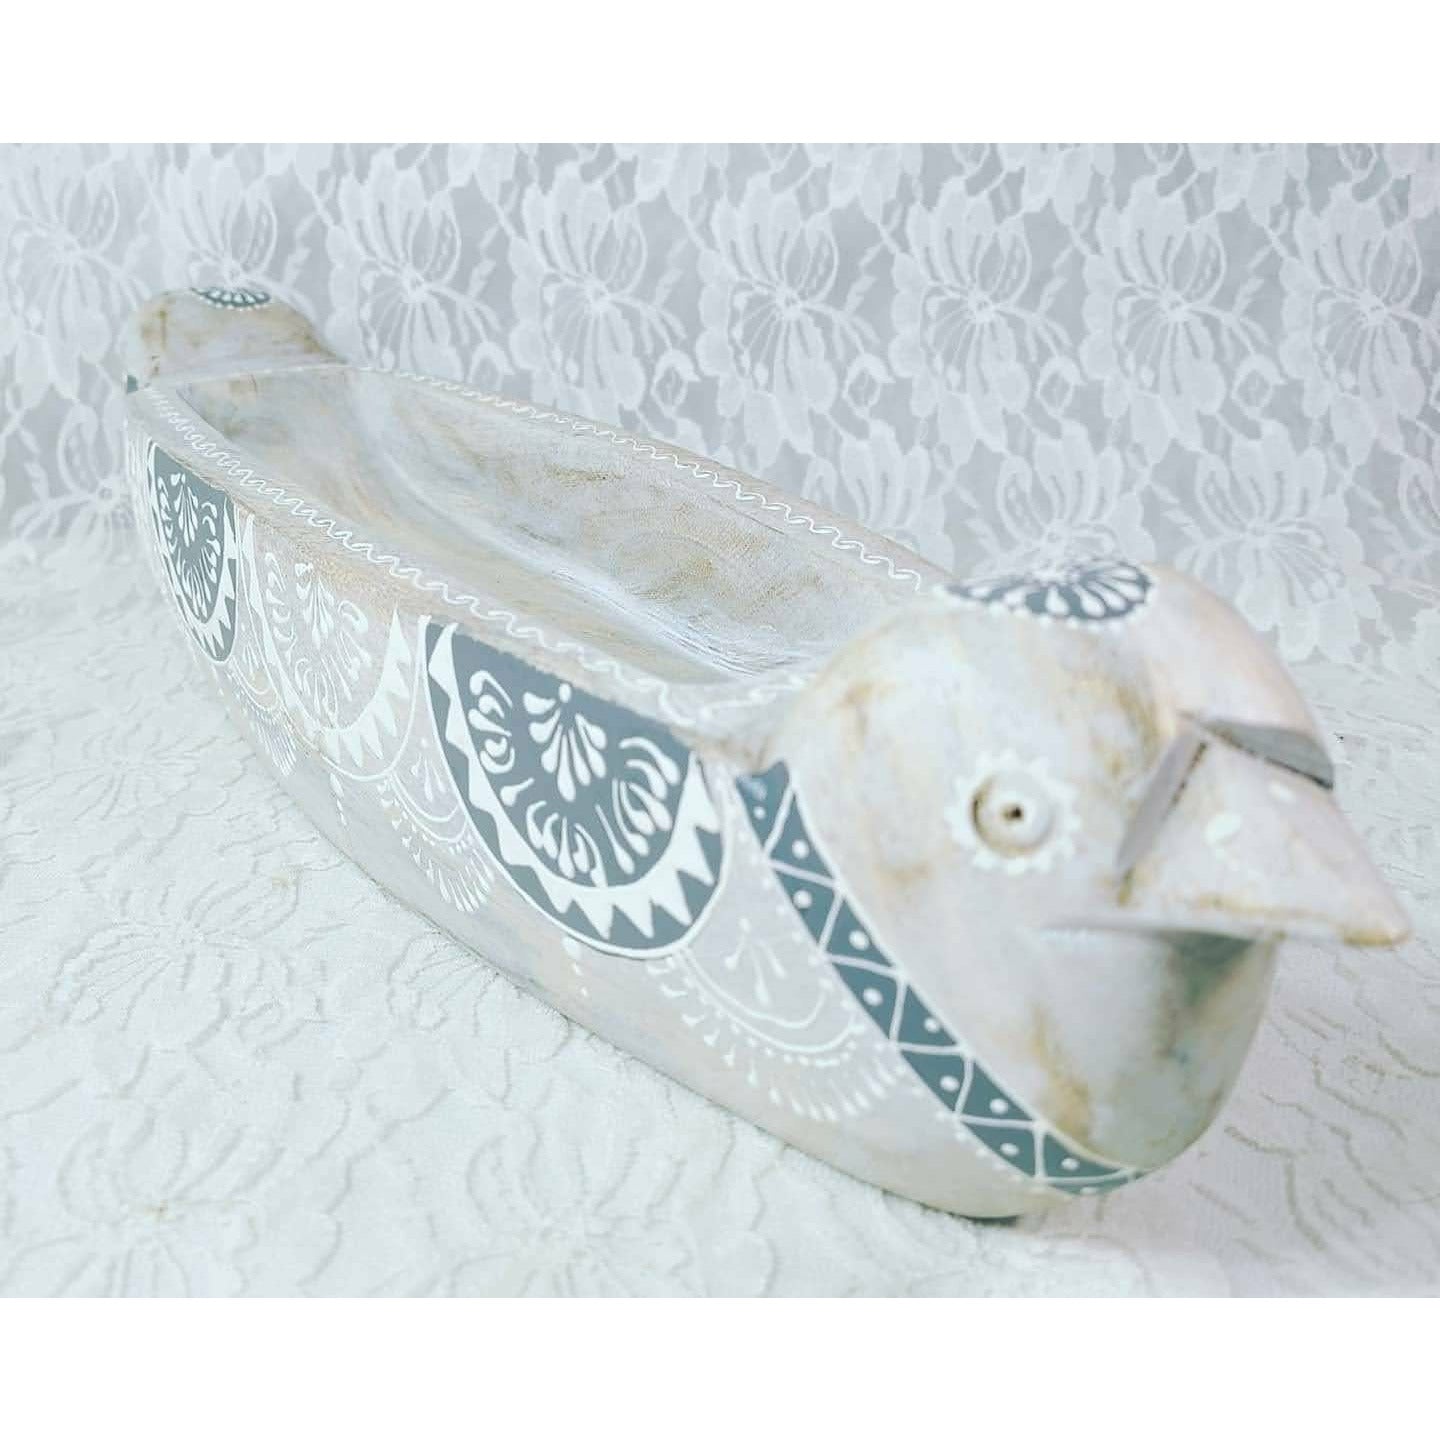 Vintage Hand Carved Double Ended Wood Bird Dish Statue ~ Hand Painted  Folk Art Bird Textured Trinket Dish ~ LARGE 17.5" x 4" Made In India